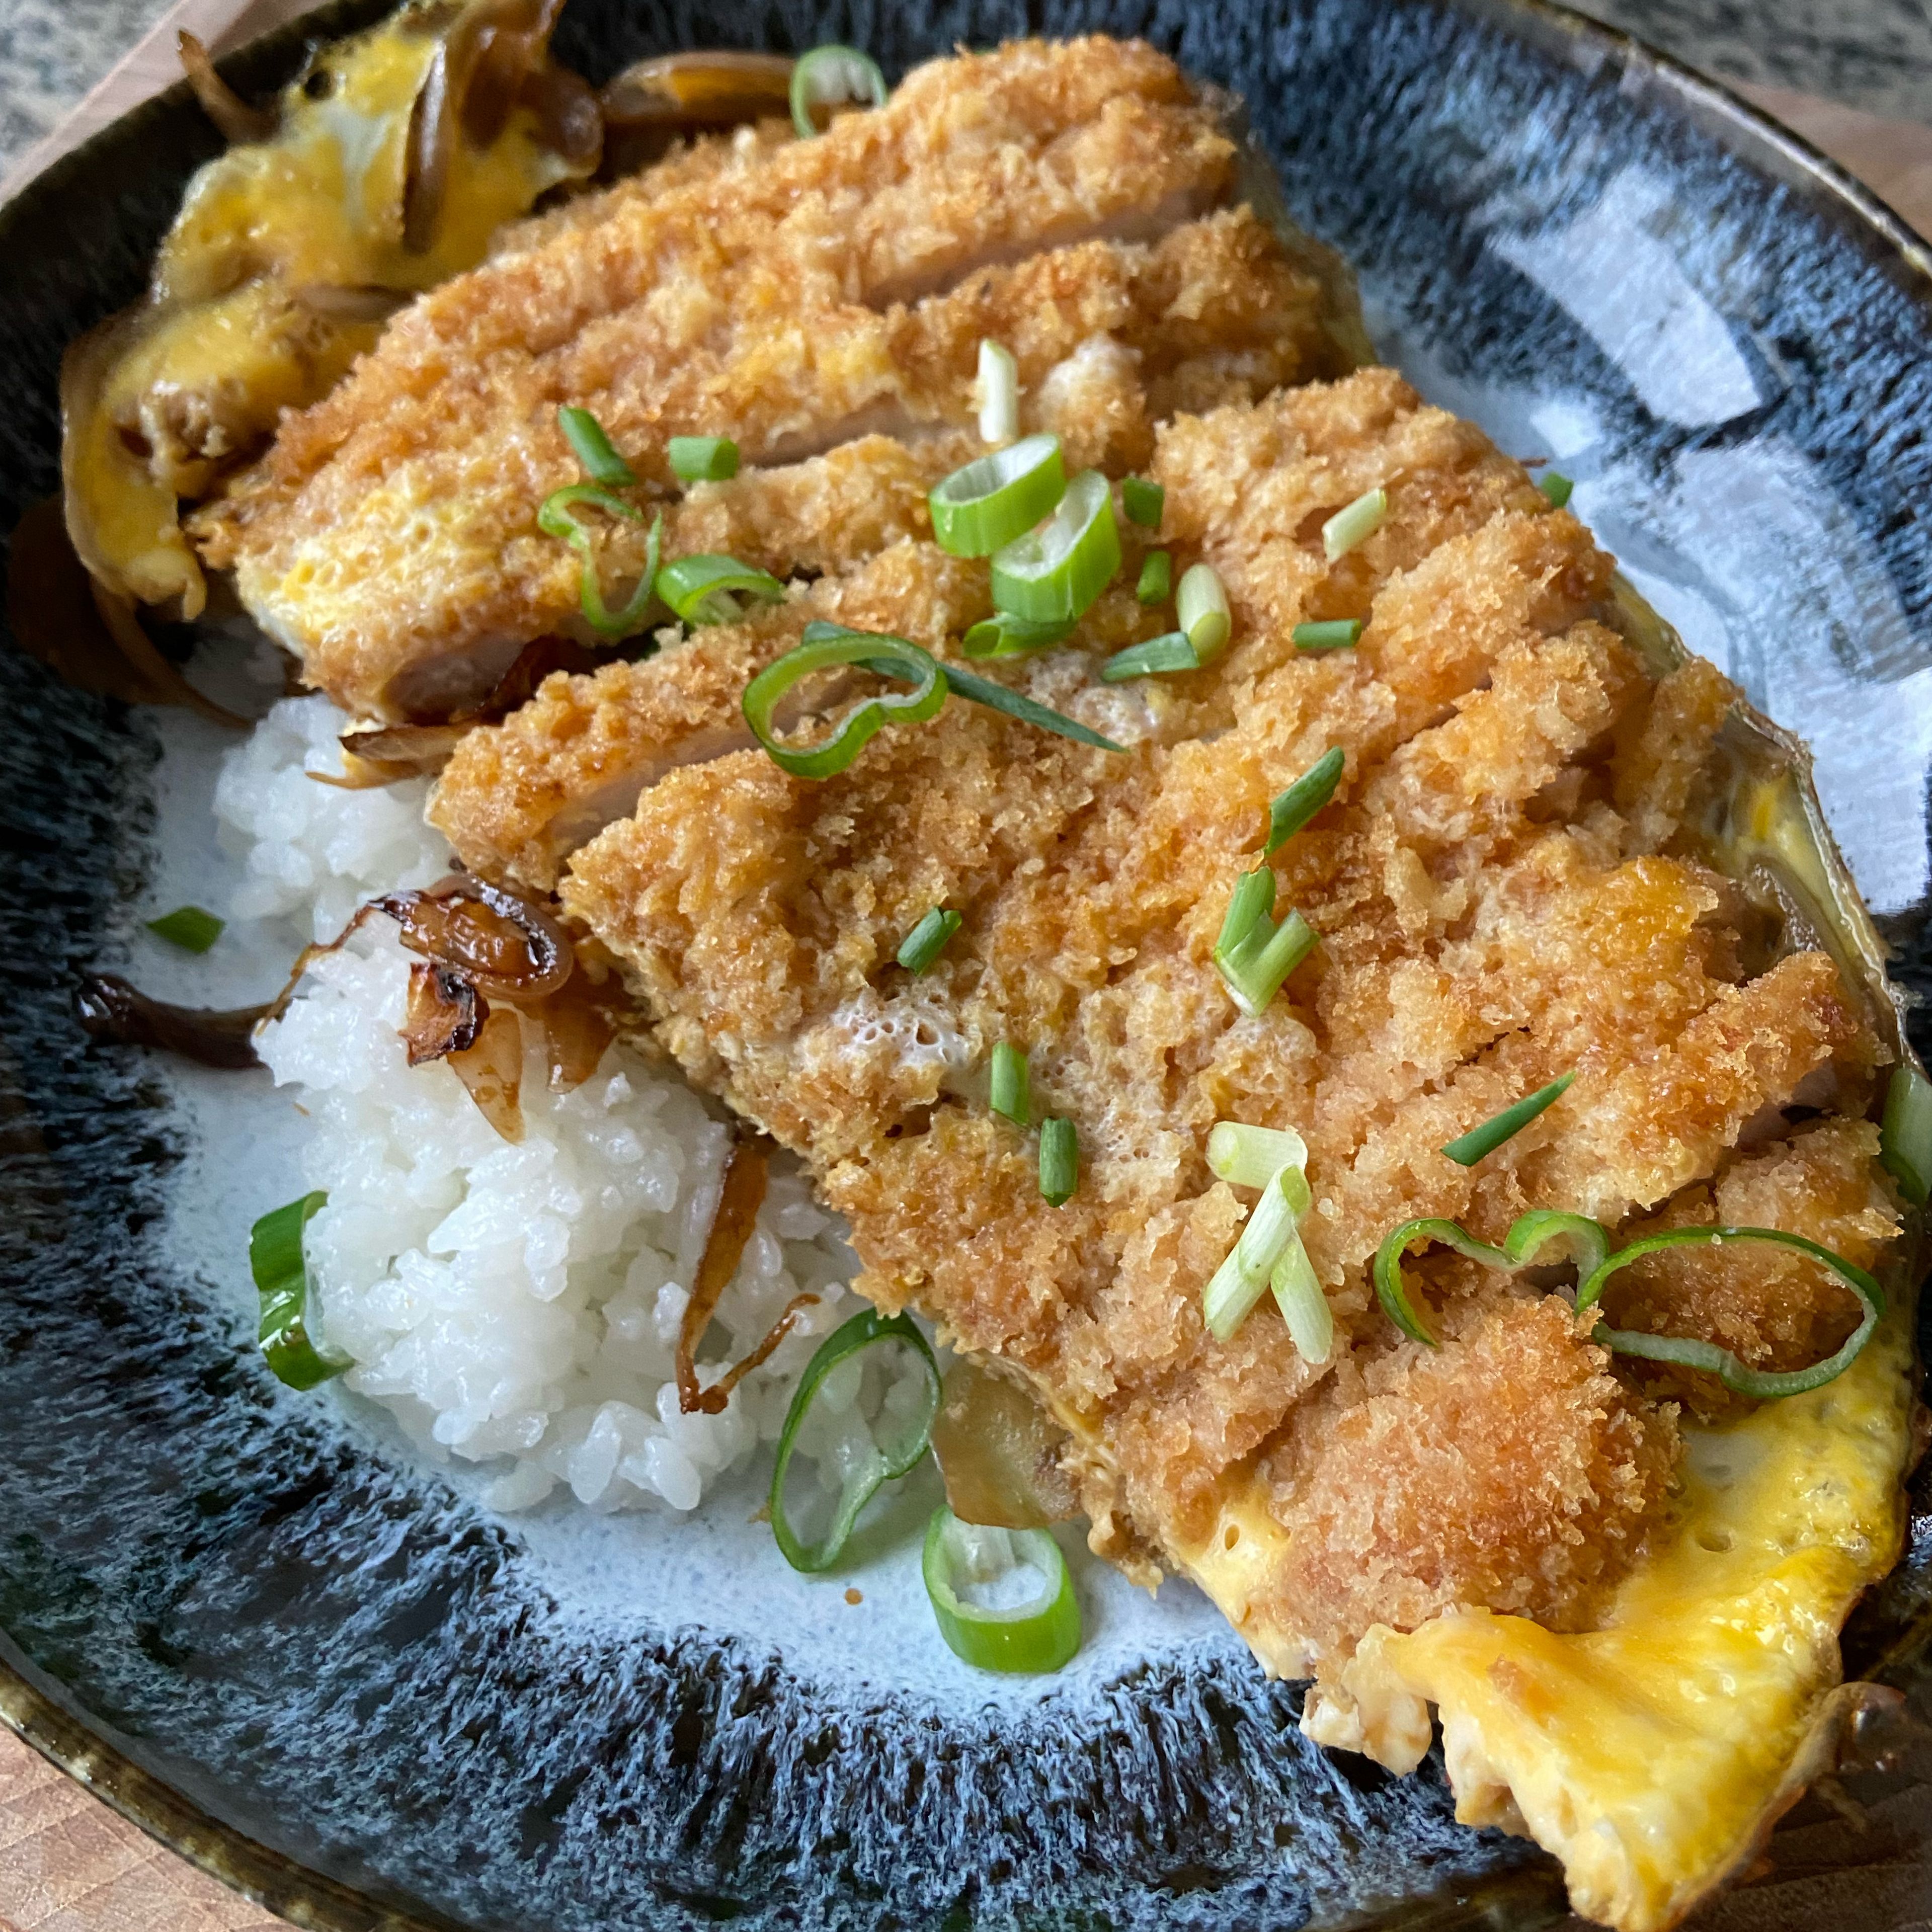 Plate each rice portion and divide the cutlet/egg mixture in half and gently transfer each to sit atop the rice. Garnish with sliced scallions and enjoy!